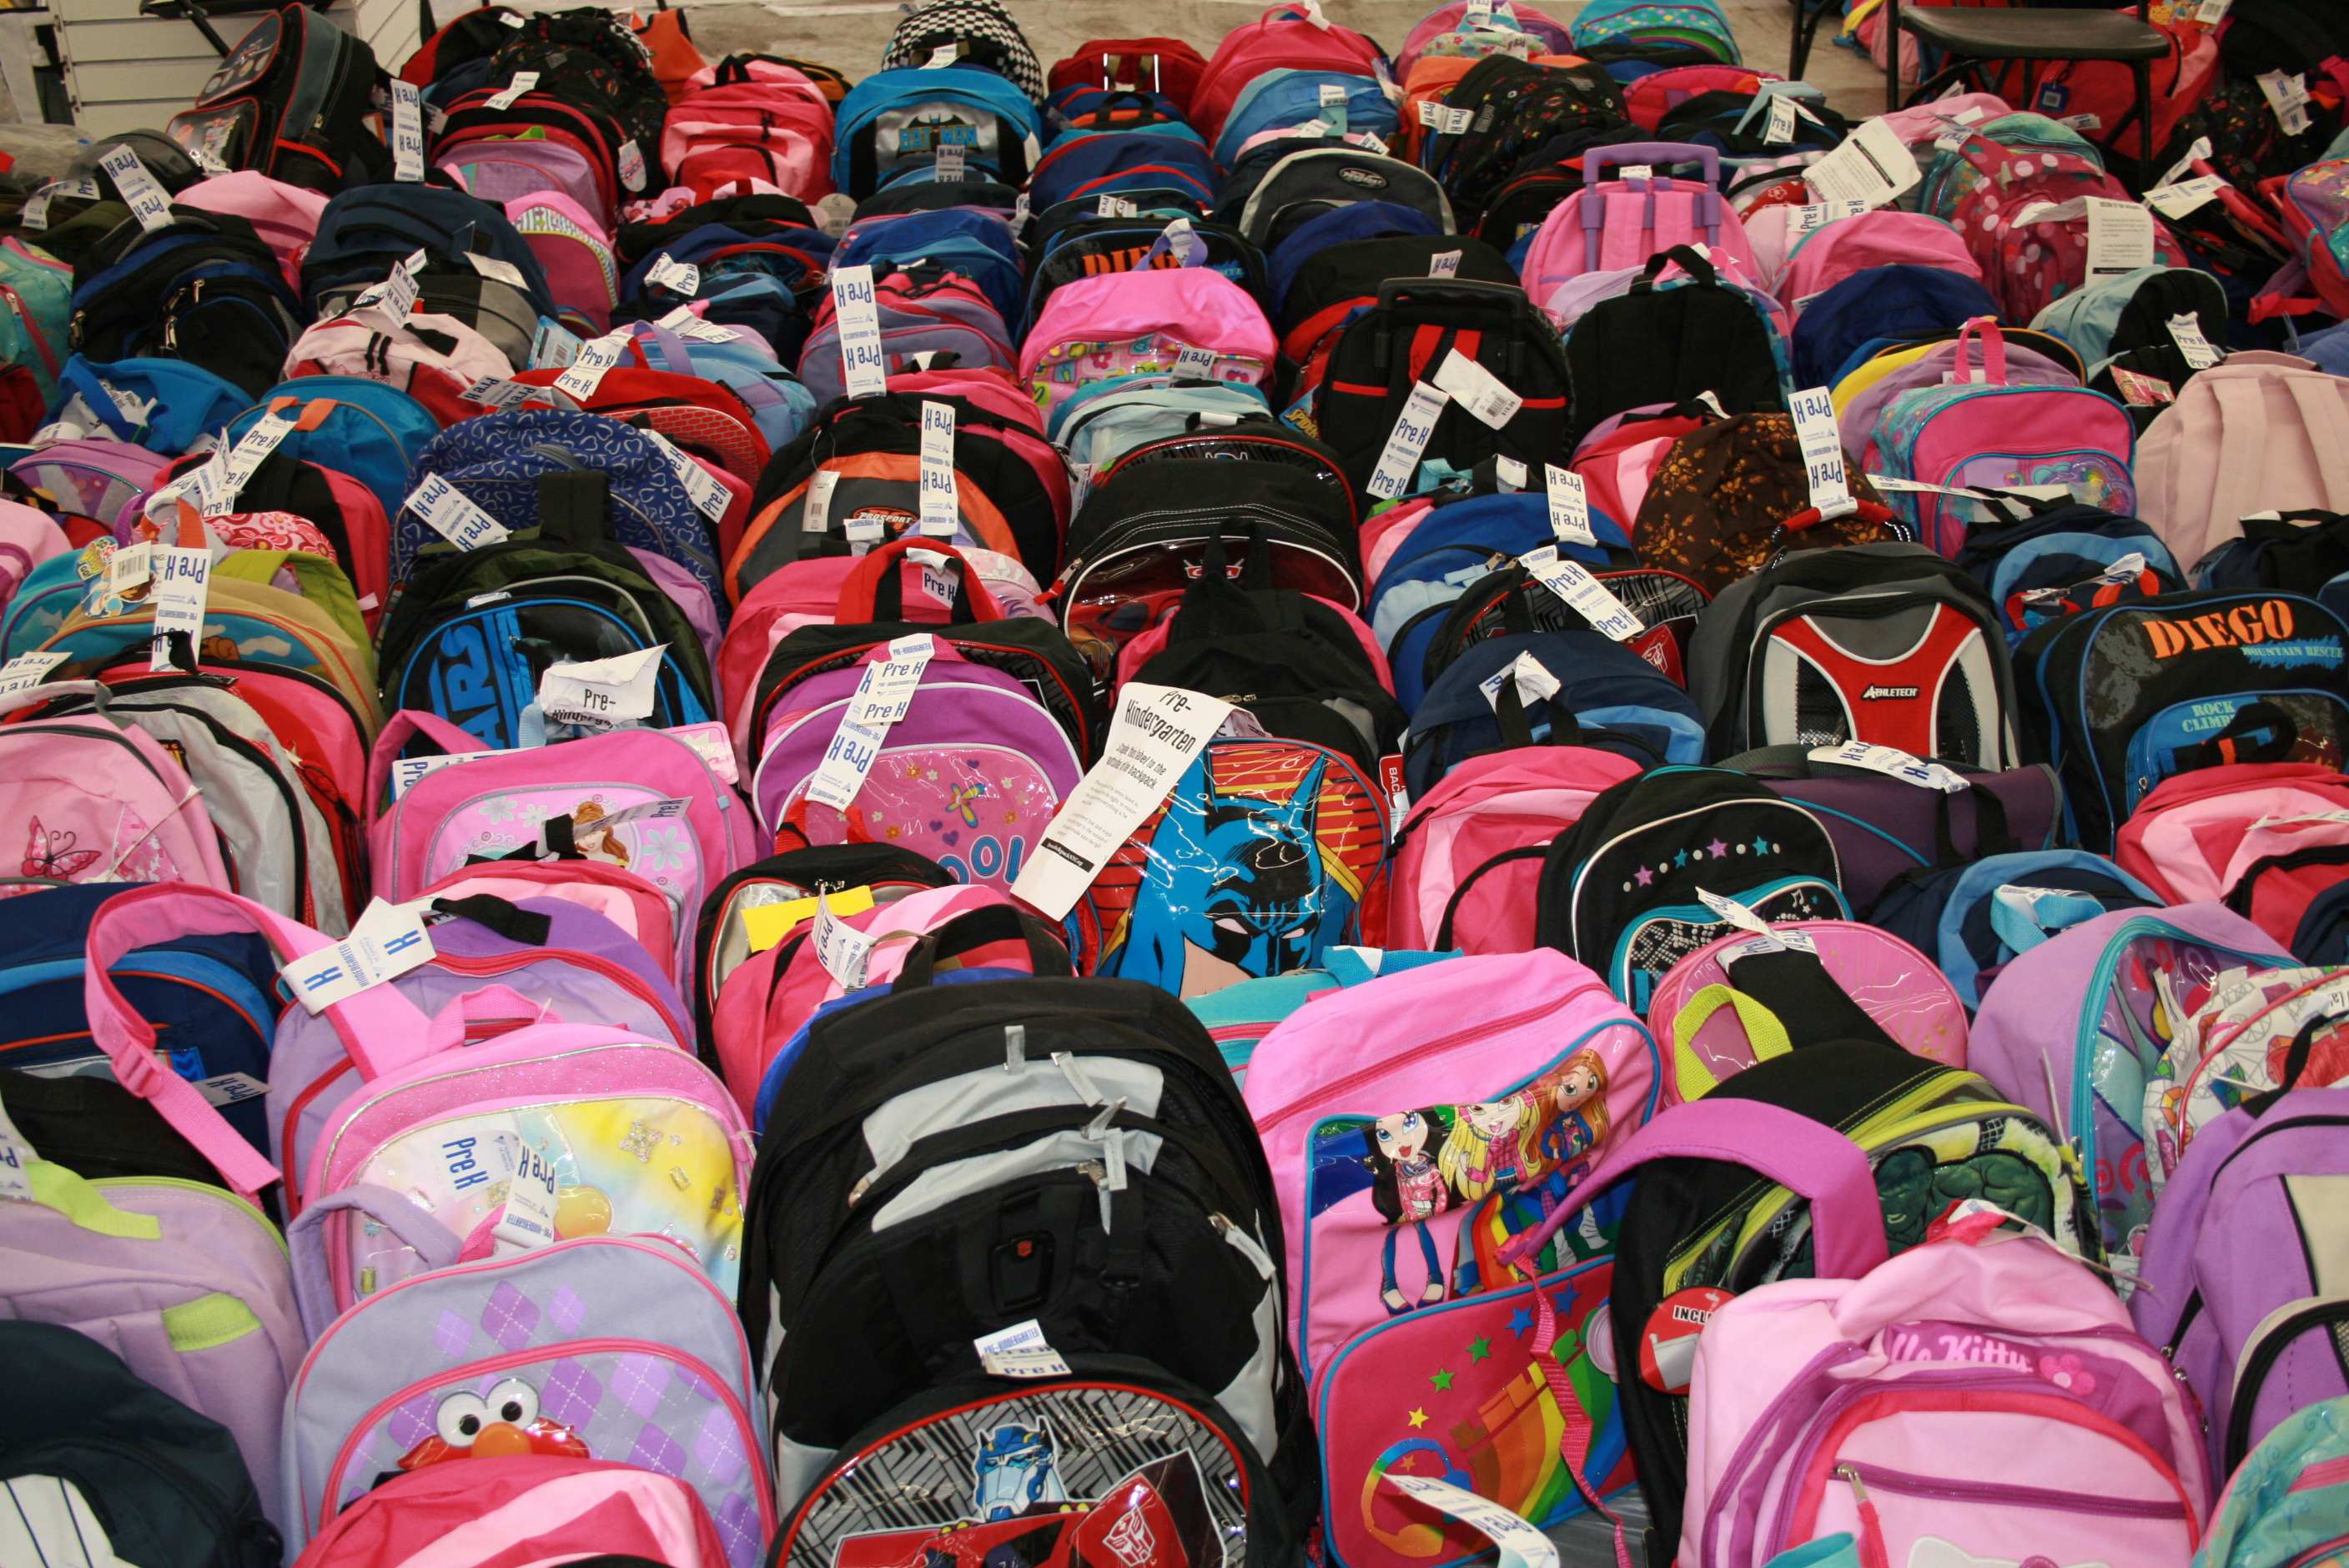 ... backpack 2013 its annual campaign to collect brand new backpacks